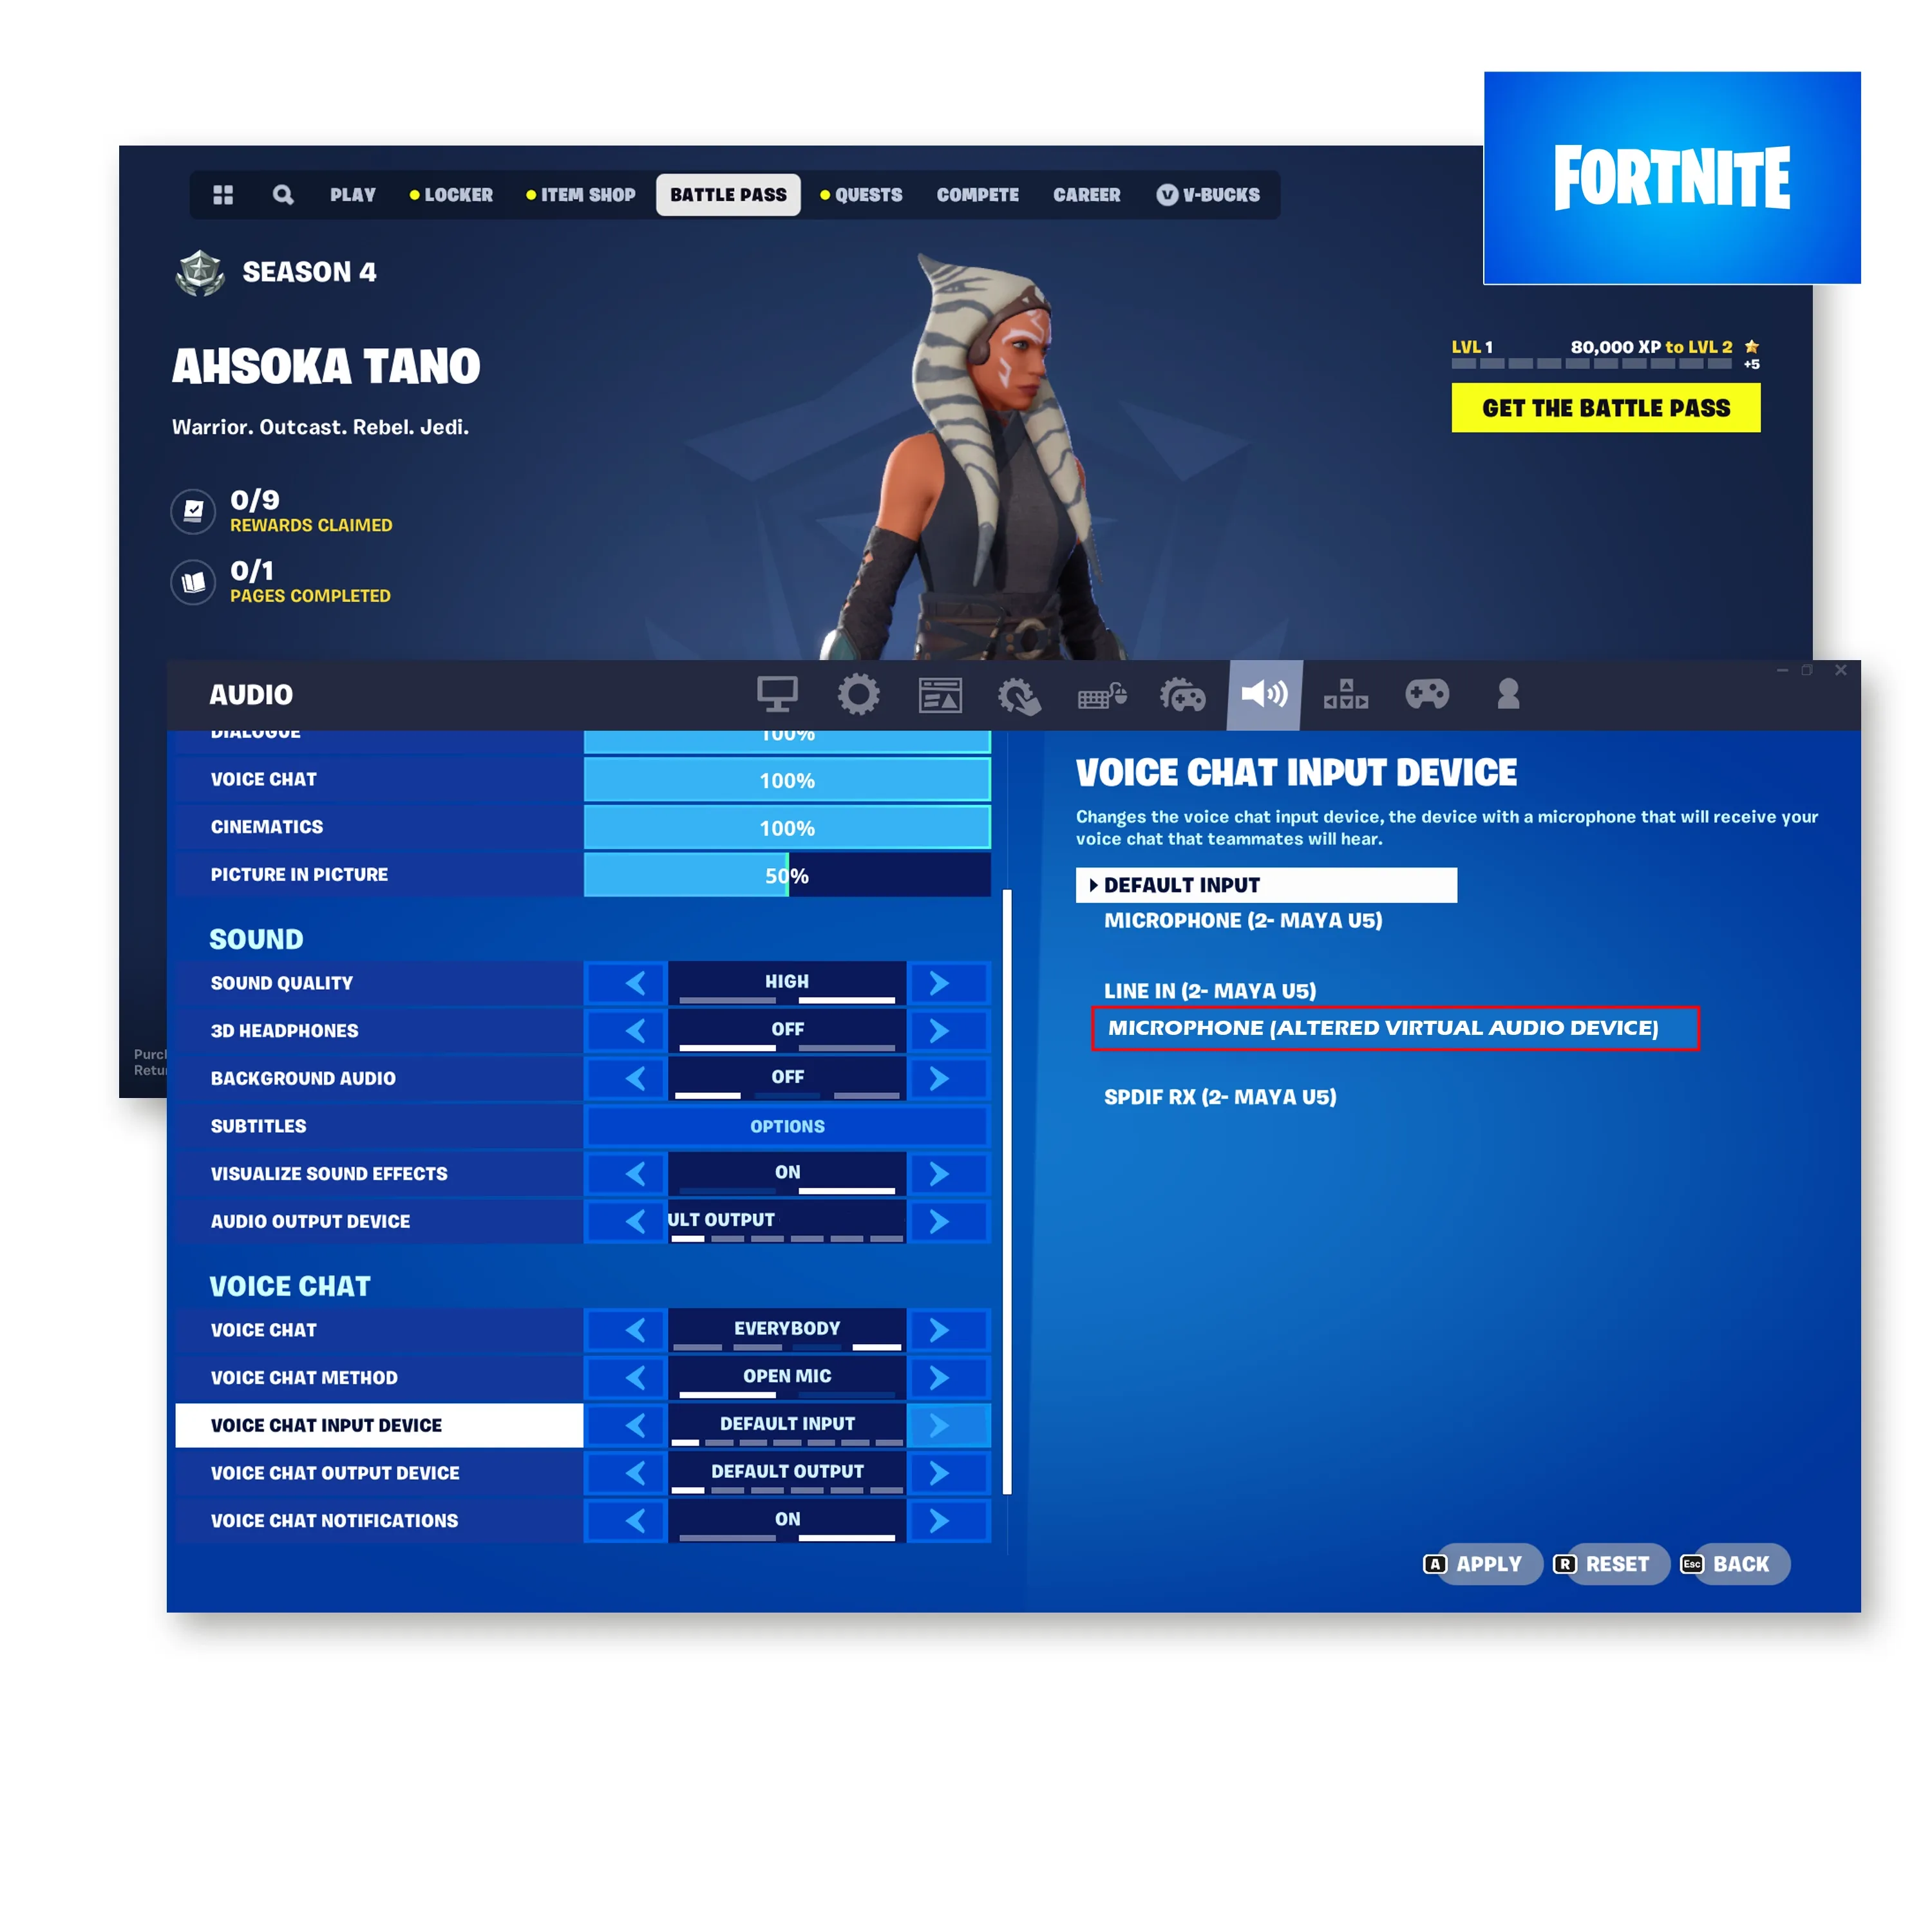 How to use Real-Time in Fortnite